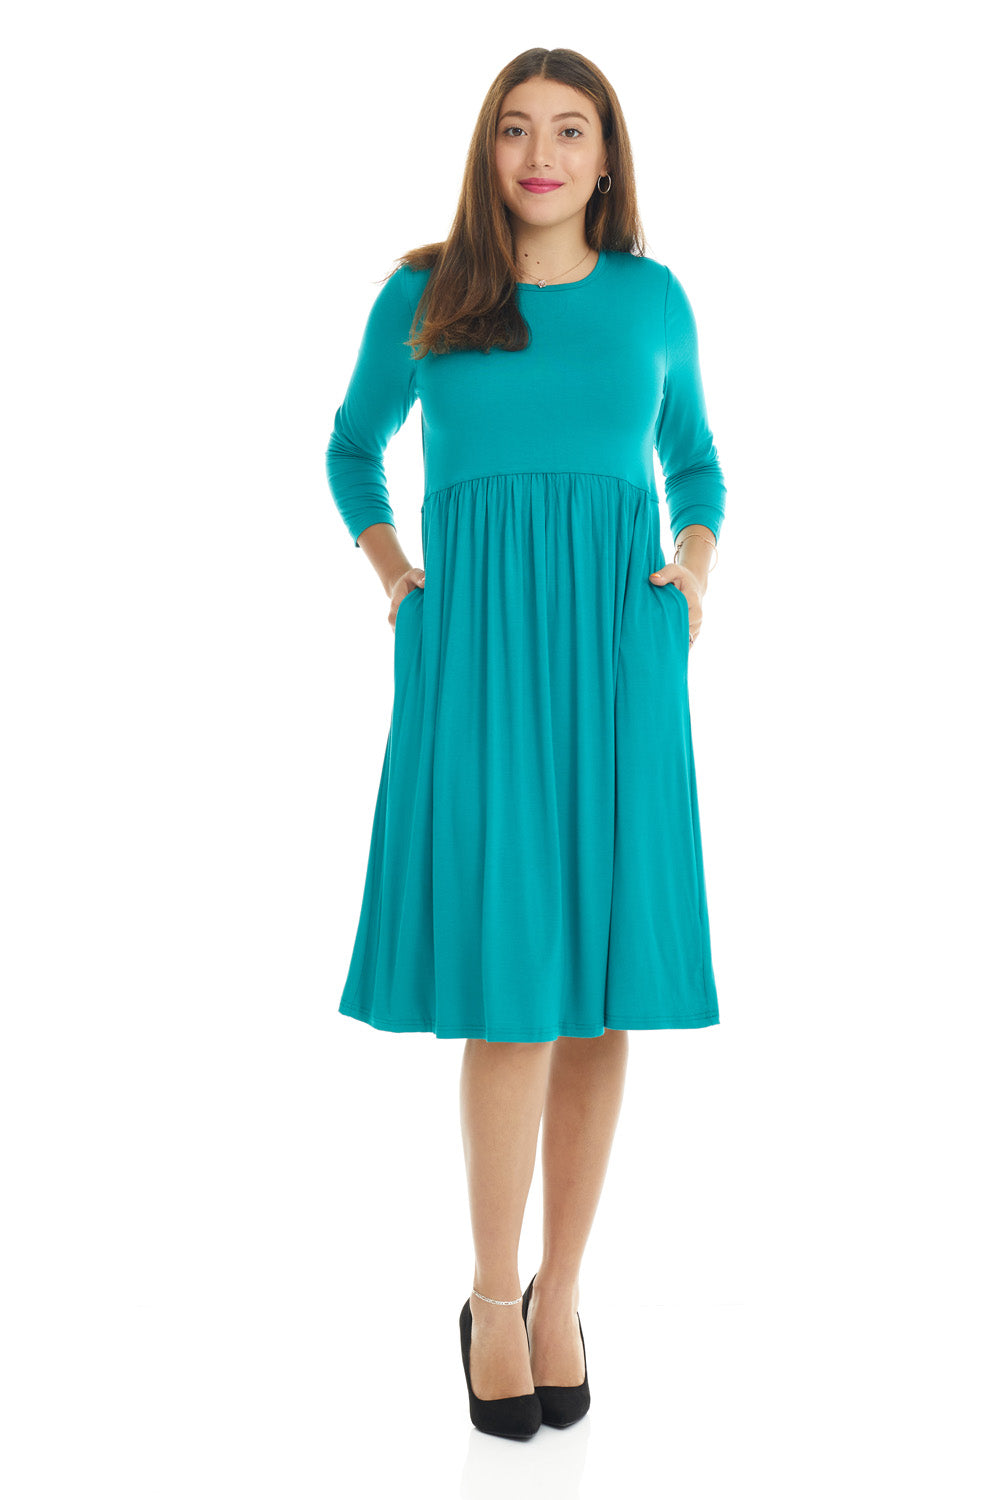 Empire Waist Teal Swing Dress with  Pockets